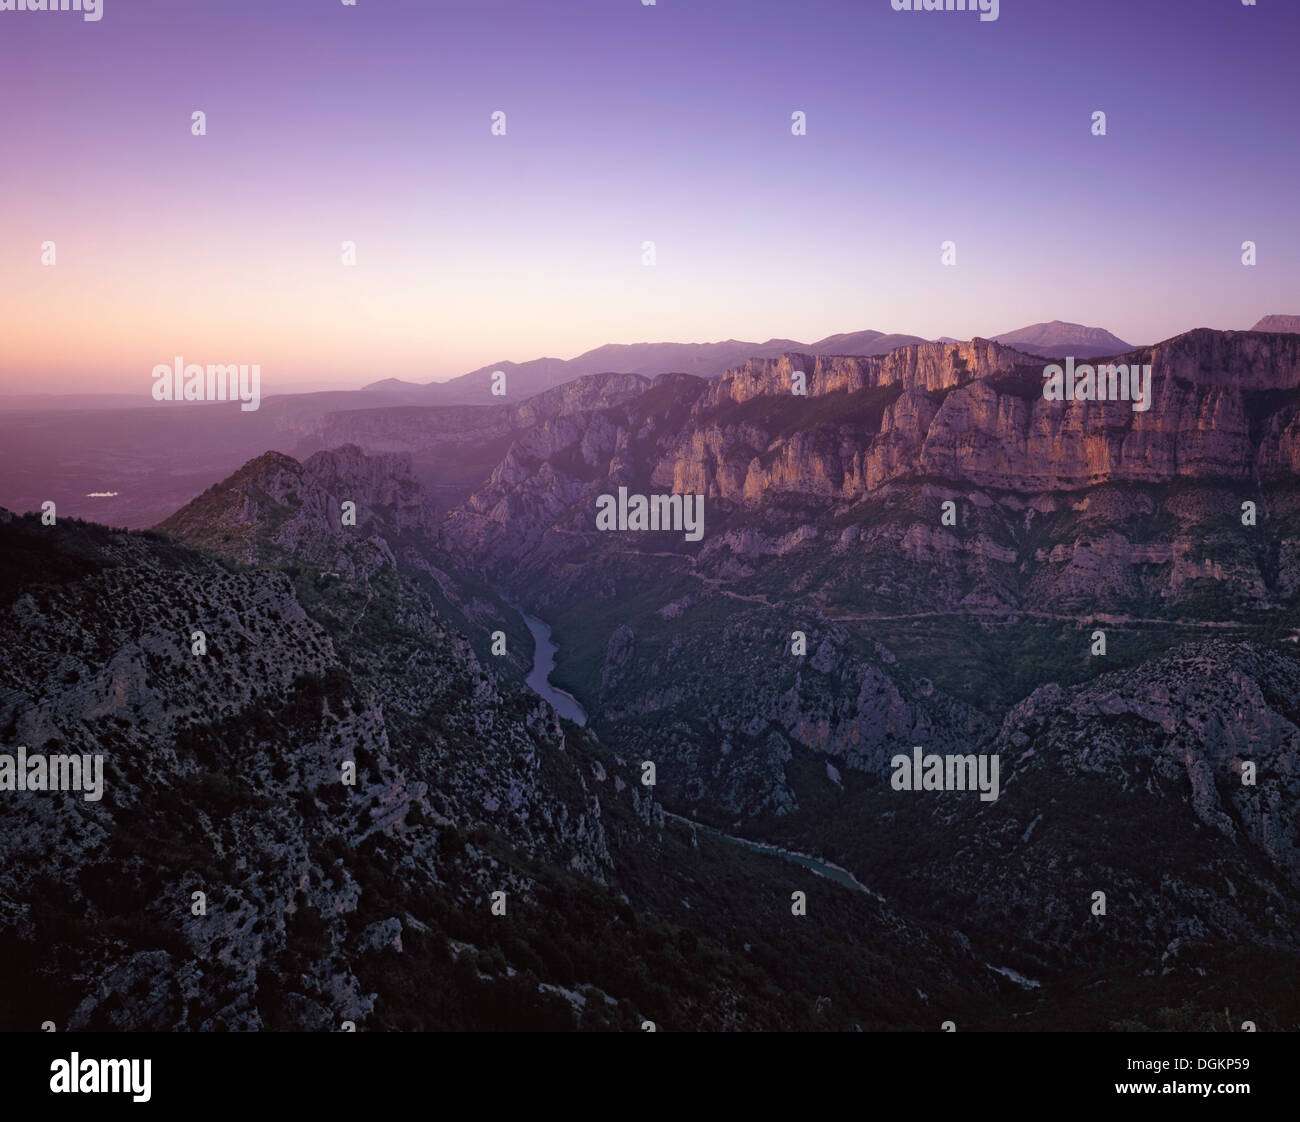 A view across the Verdon Gorge at sunset. Stock Photo